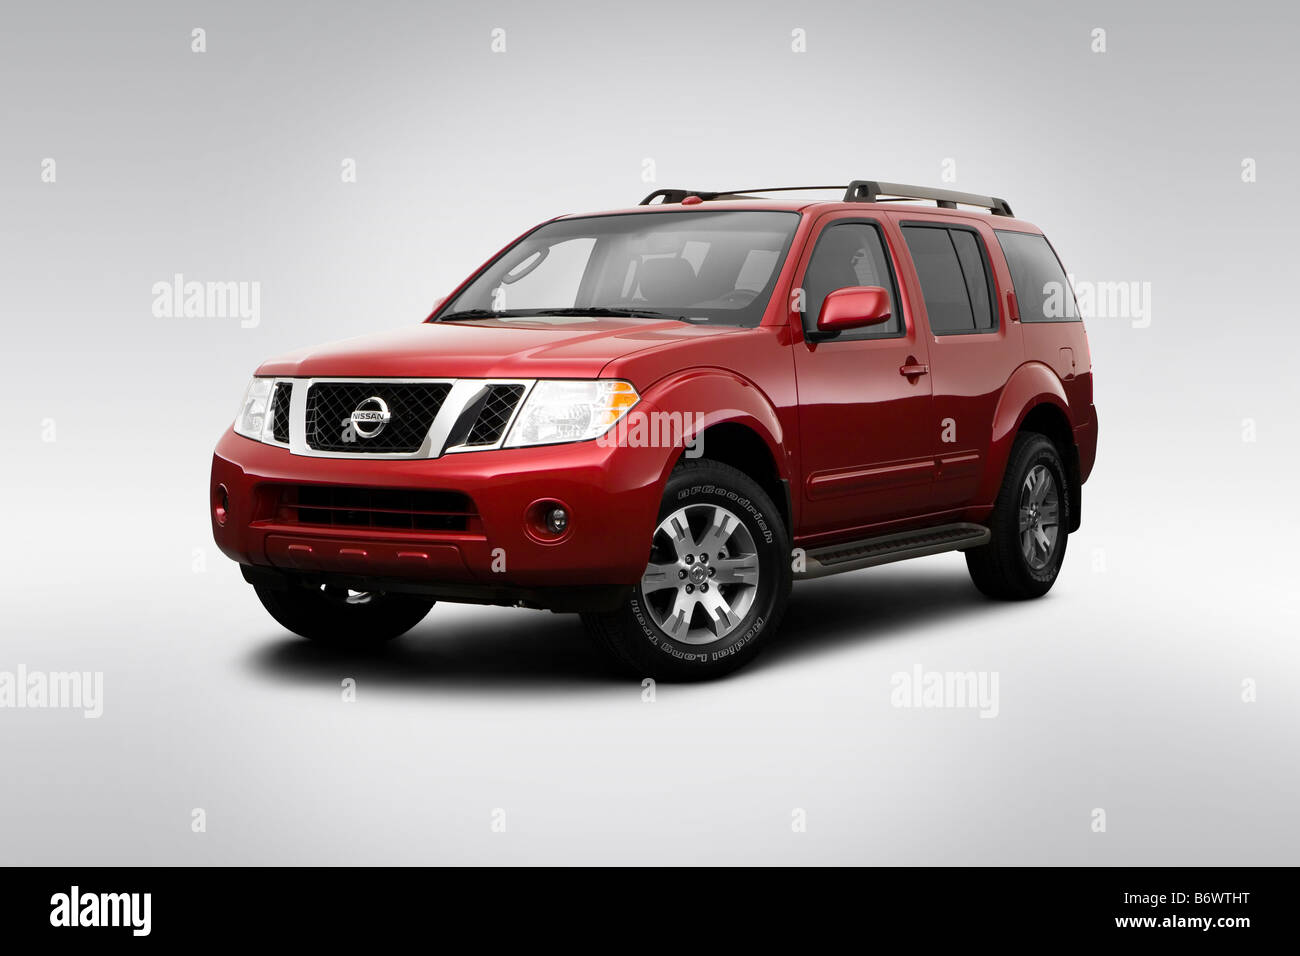 2009 Nissan Pathfinder SE in Red - Front angle view Stock Photo - Alamy